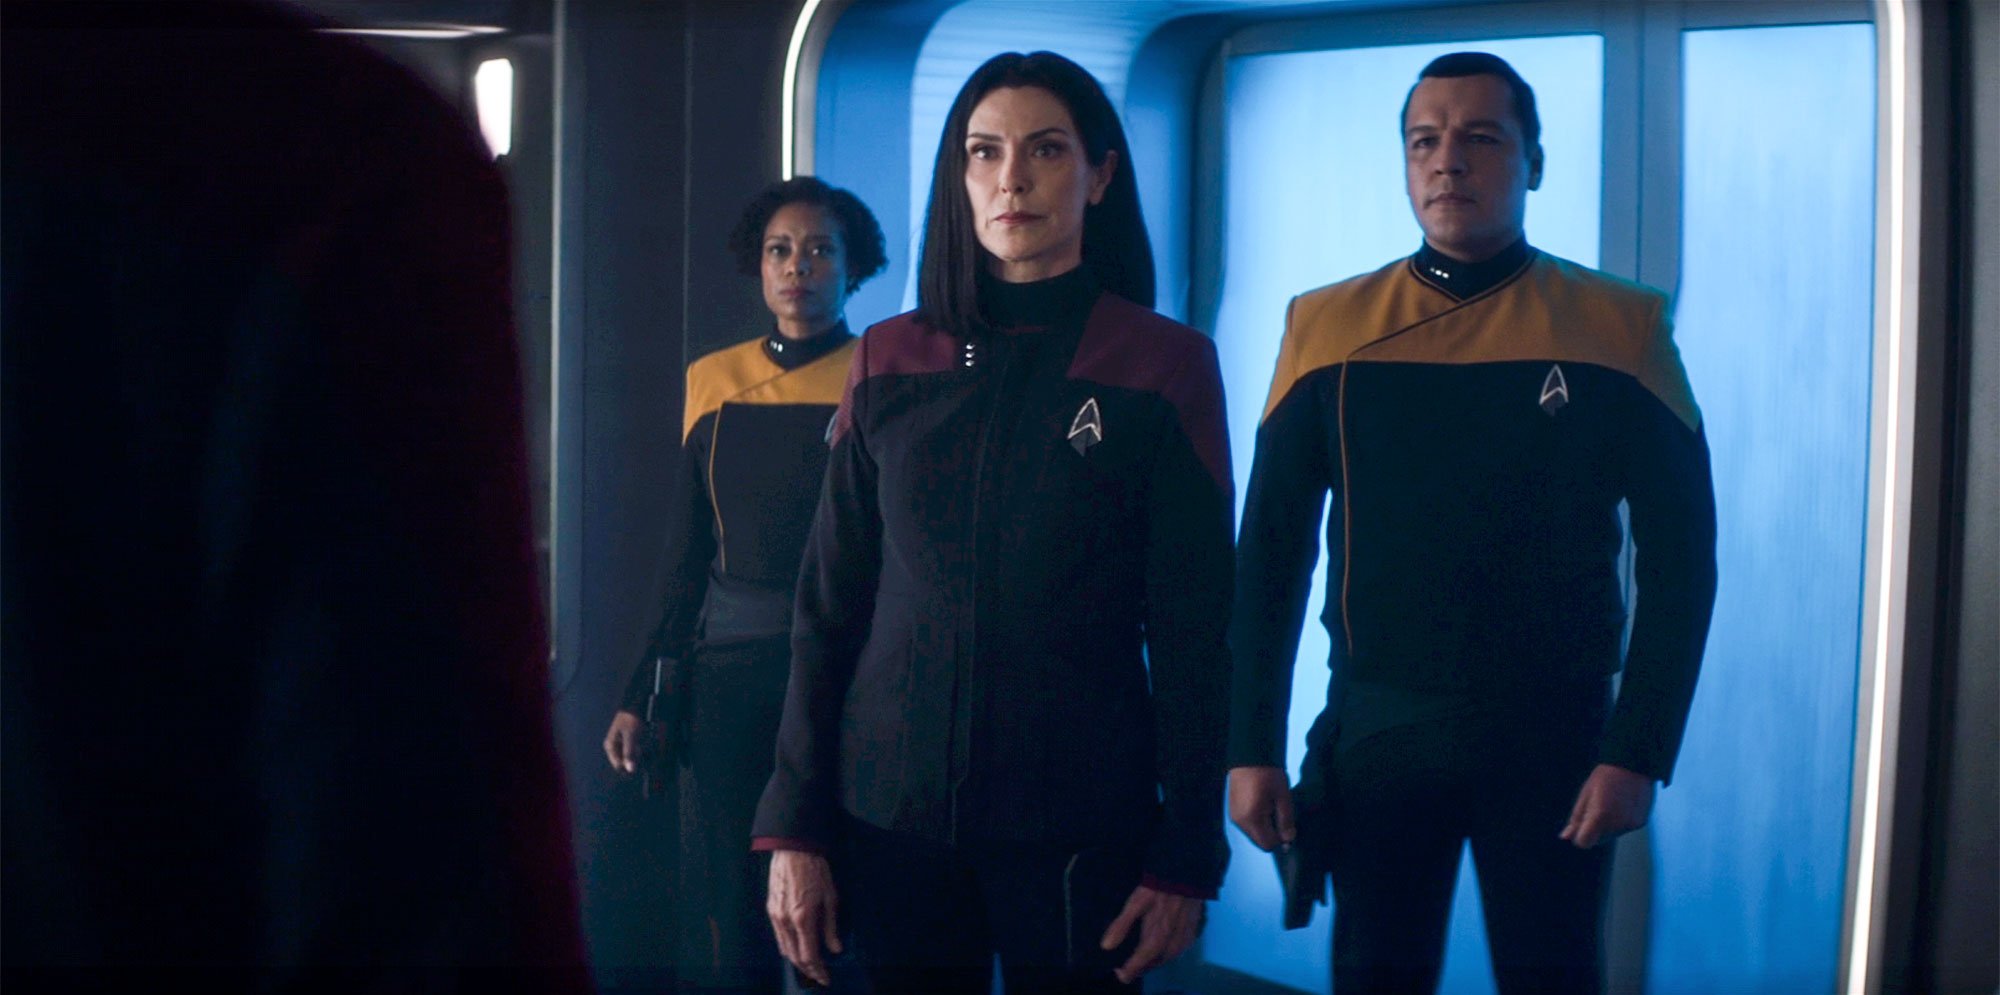 Image of Michelle Forbes as Ro Laren on 'Star Trek: Picard.' She's standing in a corridor on the Titan flanked by two Starfleet security officers. They're visible from the thighs up. Ro's dark, shoulder-length hair is parted down the middle. She's wearing a black Starfleet uniform with dark red shoulders. The security officer on the left is a Black woman with short, curly, dark hair who's wearing a black Starfleet uniform with gold shoulders. The security officer on the right is a man with brown skin in the same uniform as the woman on the left. The three of them are looking at someone standing in the corner of the frame out-of-focus.